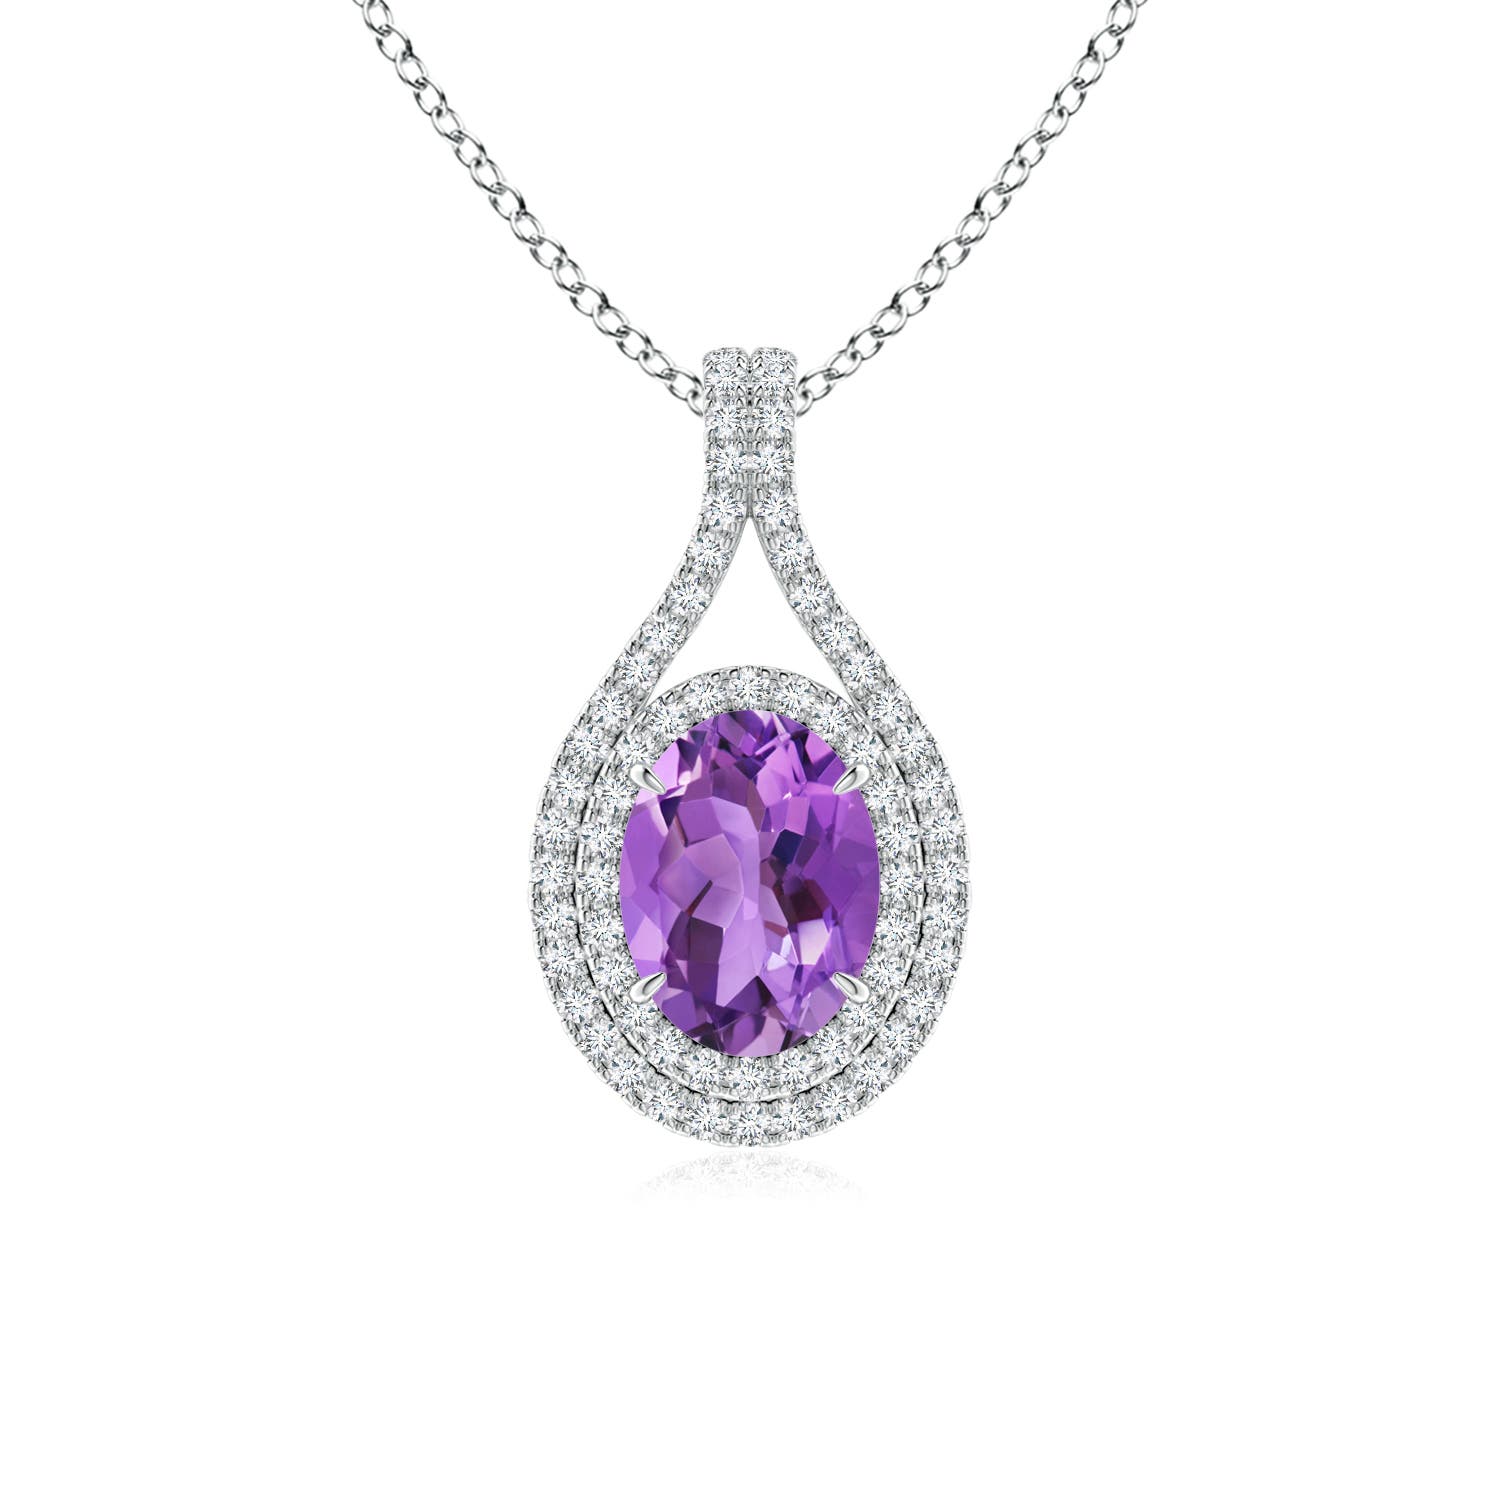 AA - Amethyst / 1.45 CT / 14 KT White Gold